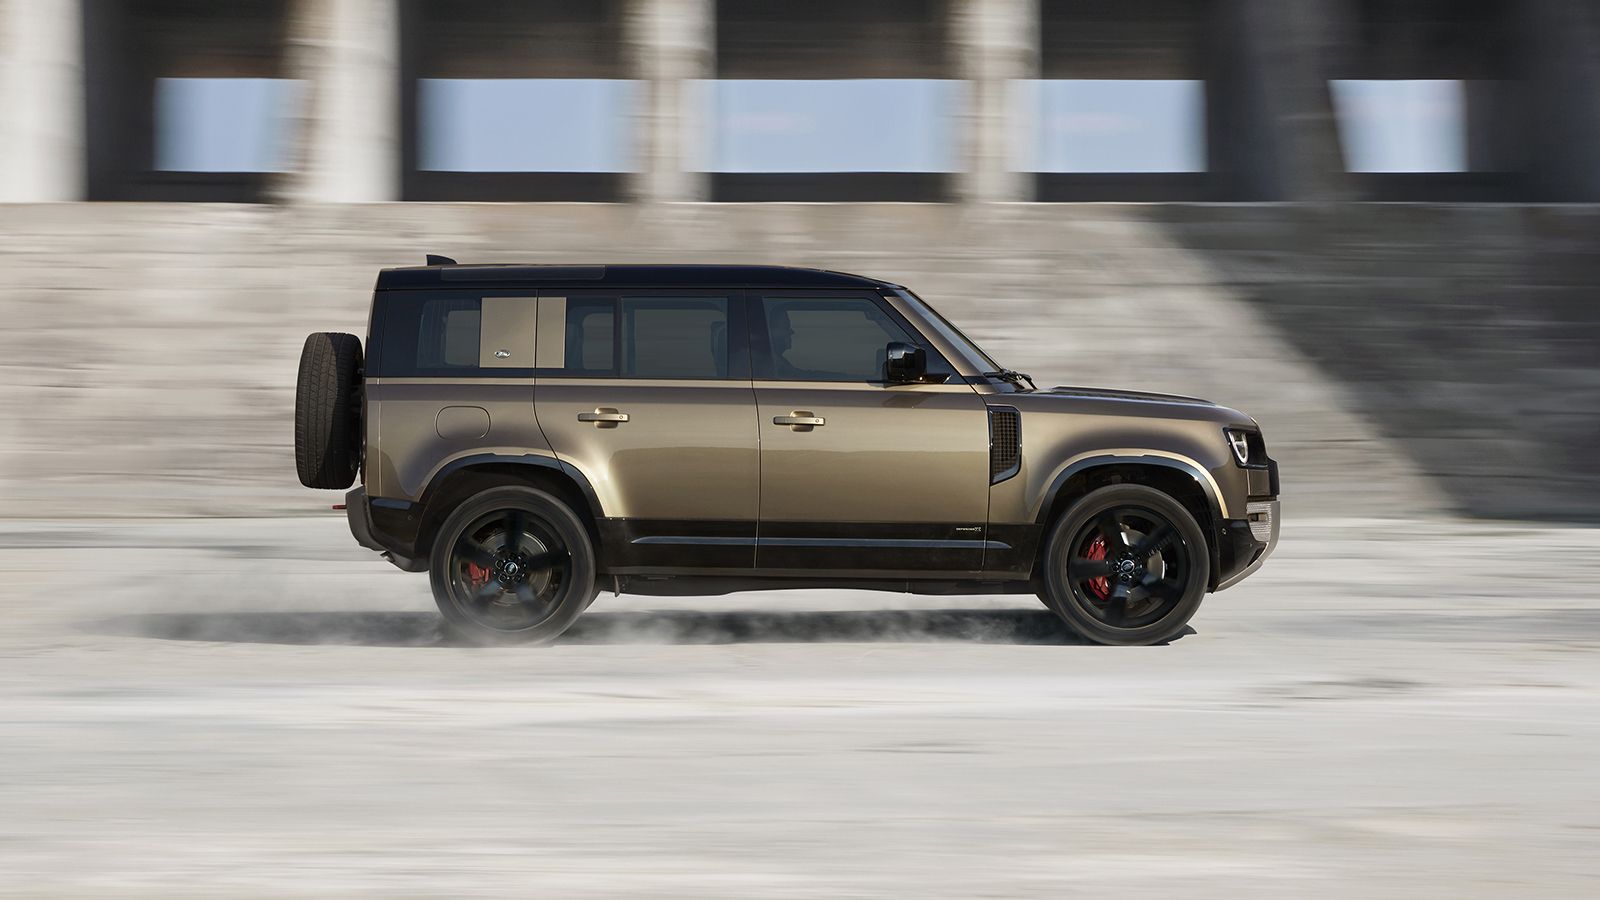 Range Rover Defender First Edition Price  : The Top Variant Land Rover Defender On Road Price Is ₹ 69.99 Lakh For The Base Defender 90 Variant, Going All The Way Up To Rs.